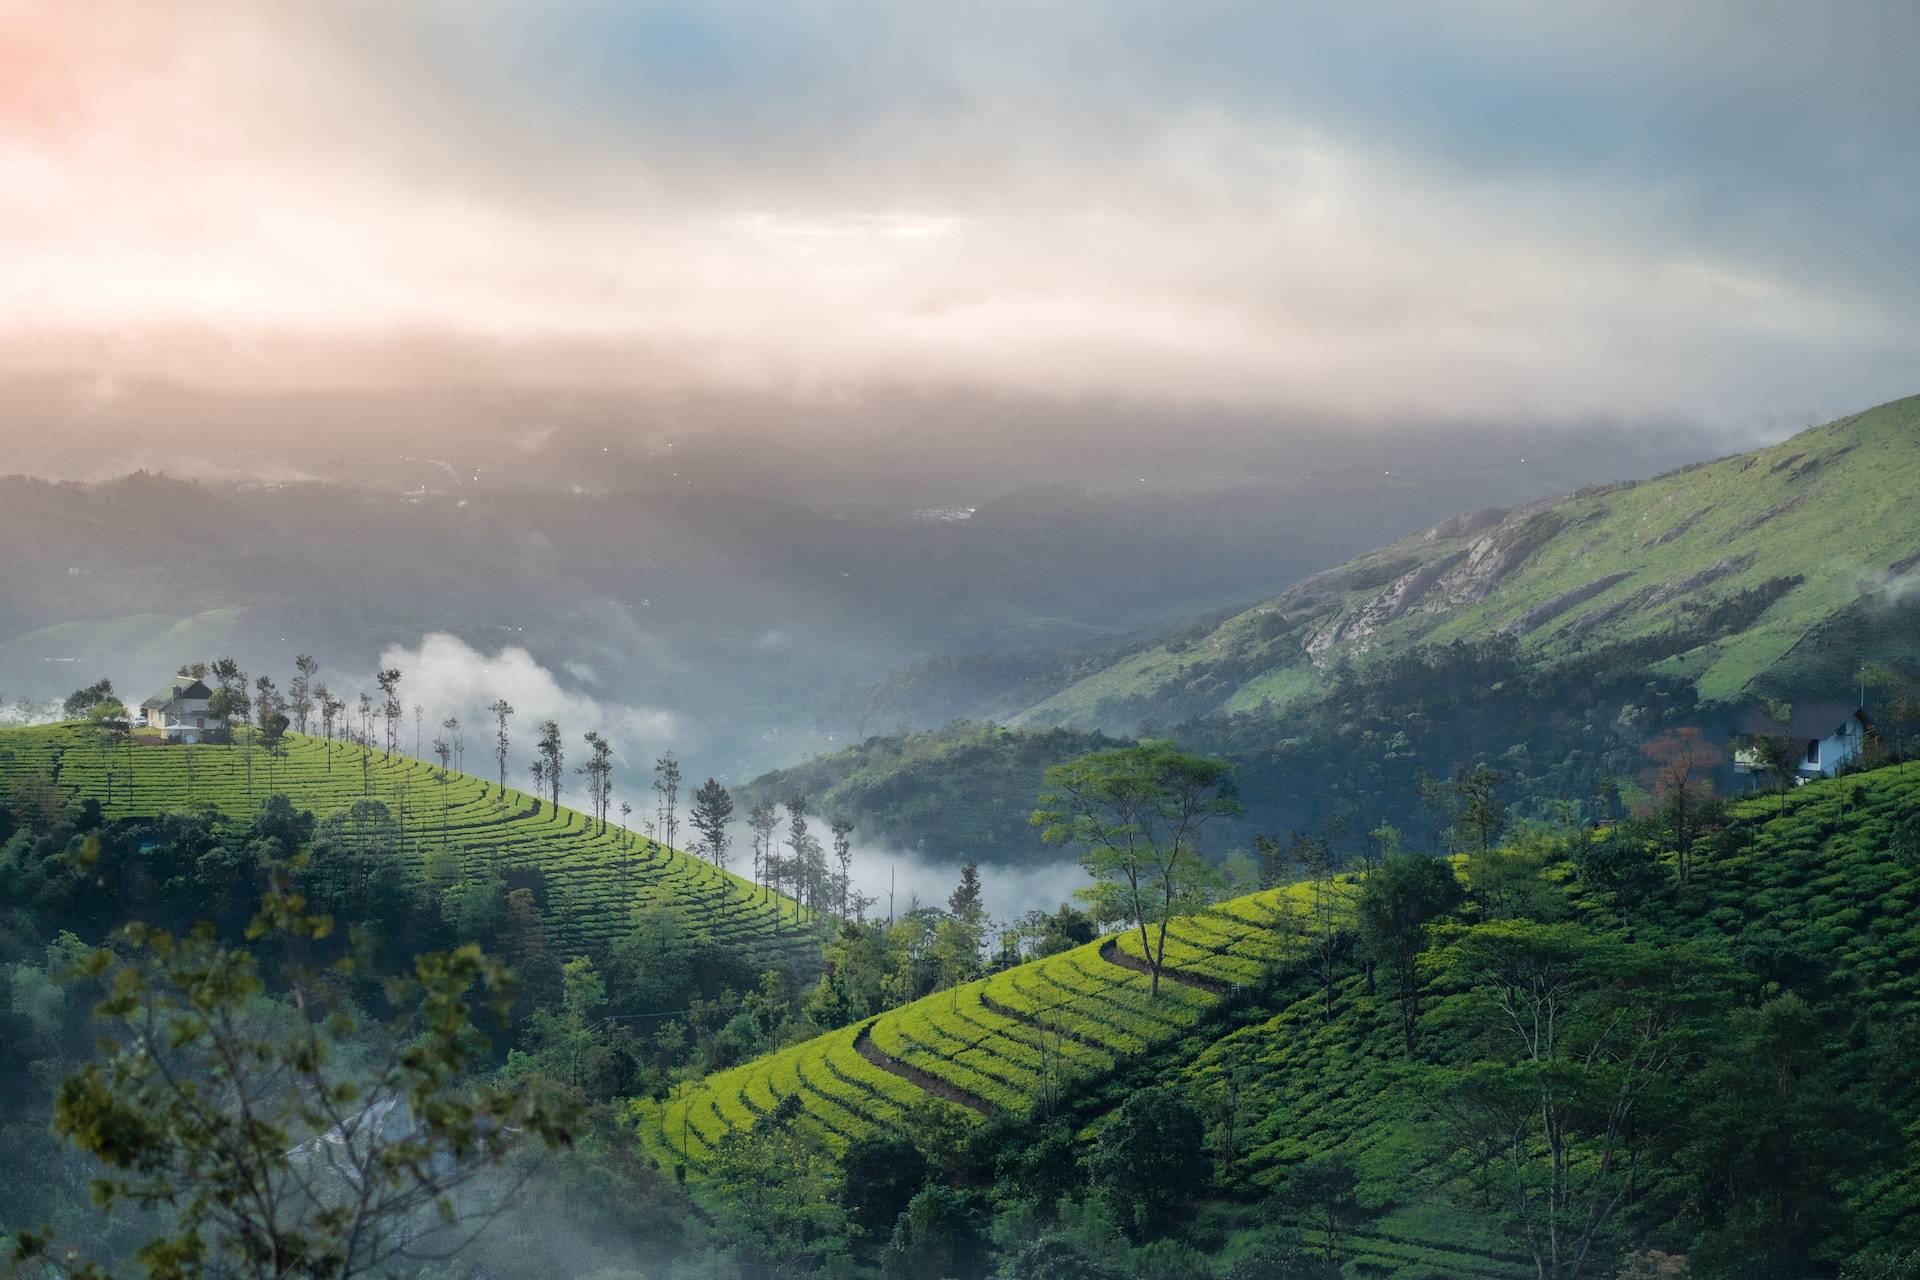 Travel Guide: 4 underrated locations to visit in Kerala before they are flooded with tourists